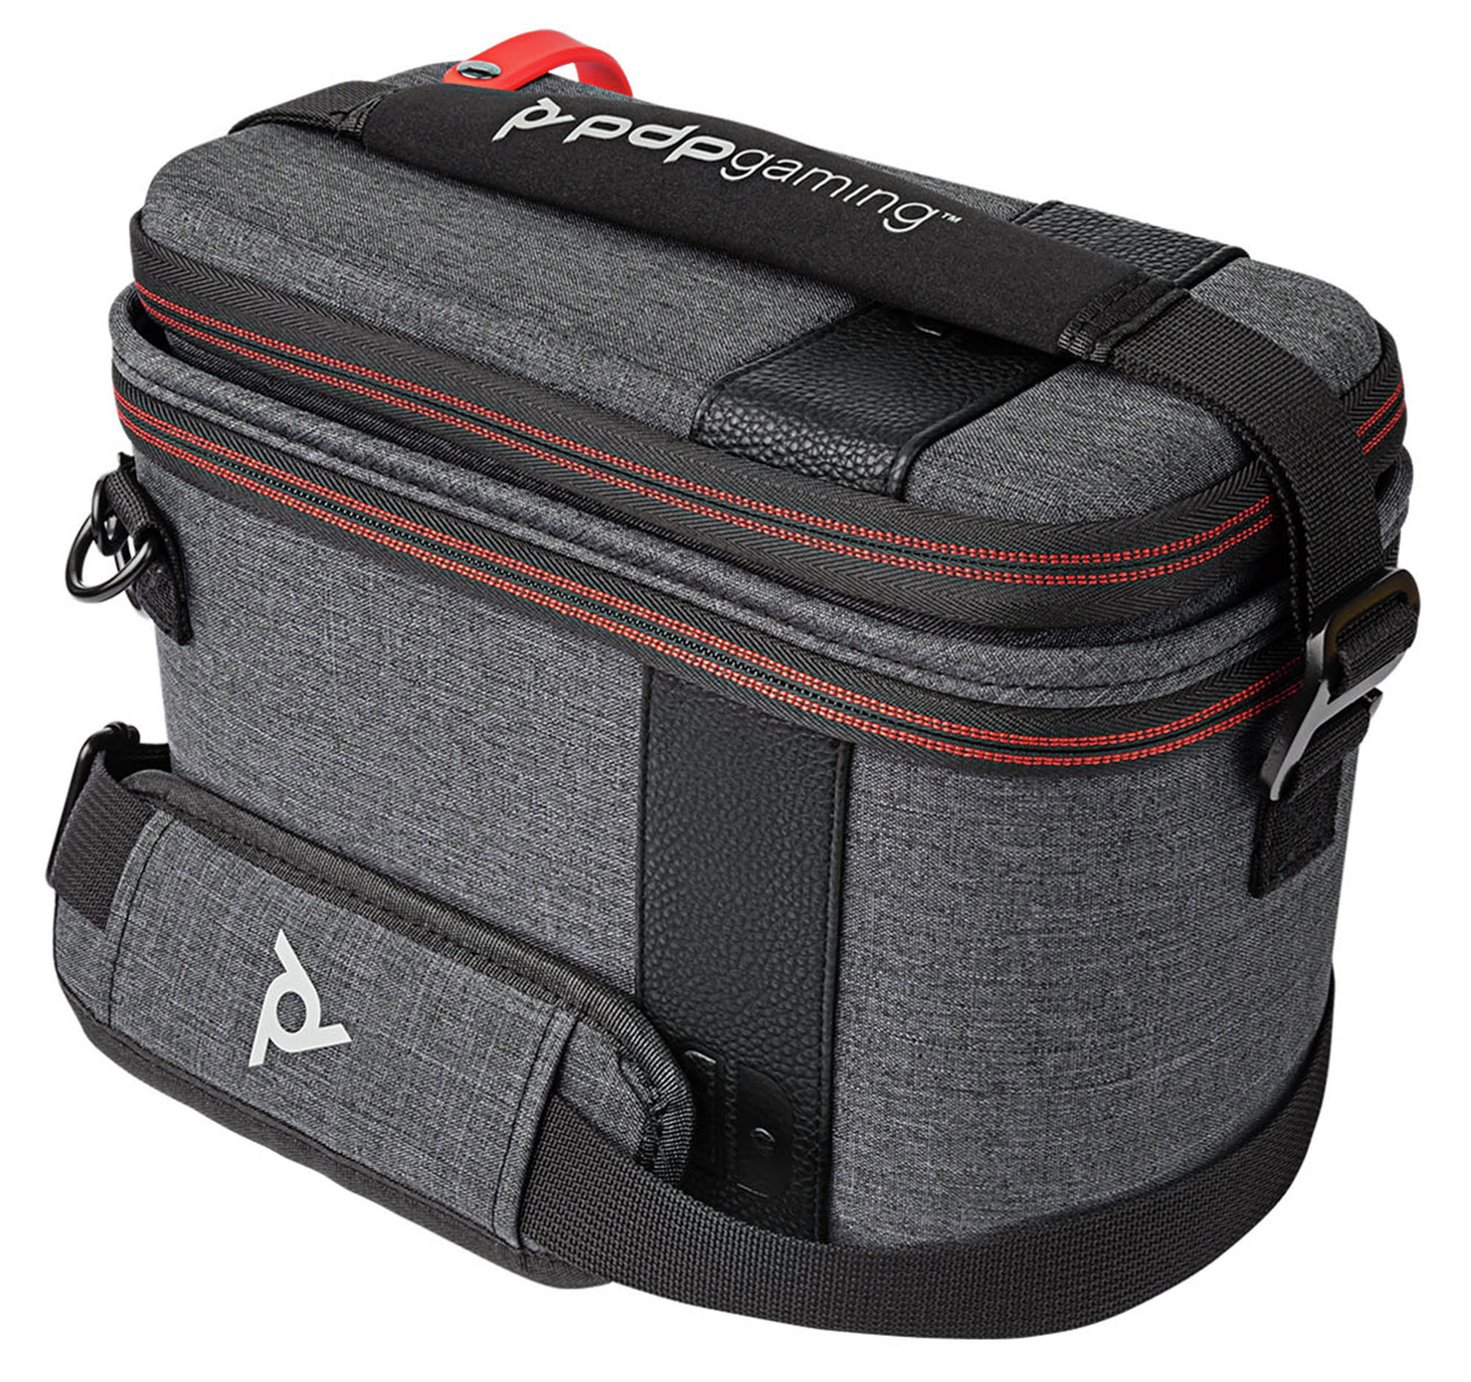 Nintendo Switch Elite Pull-N-Go Case Review